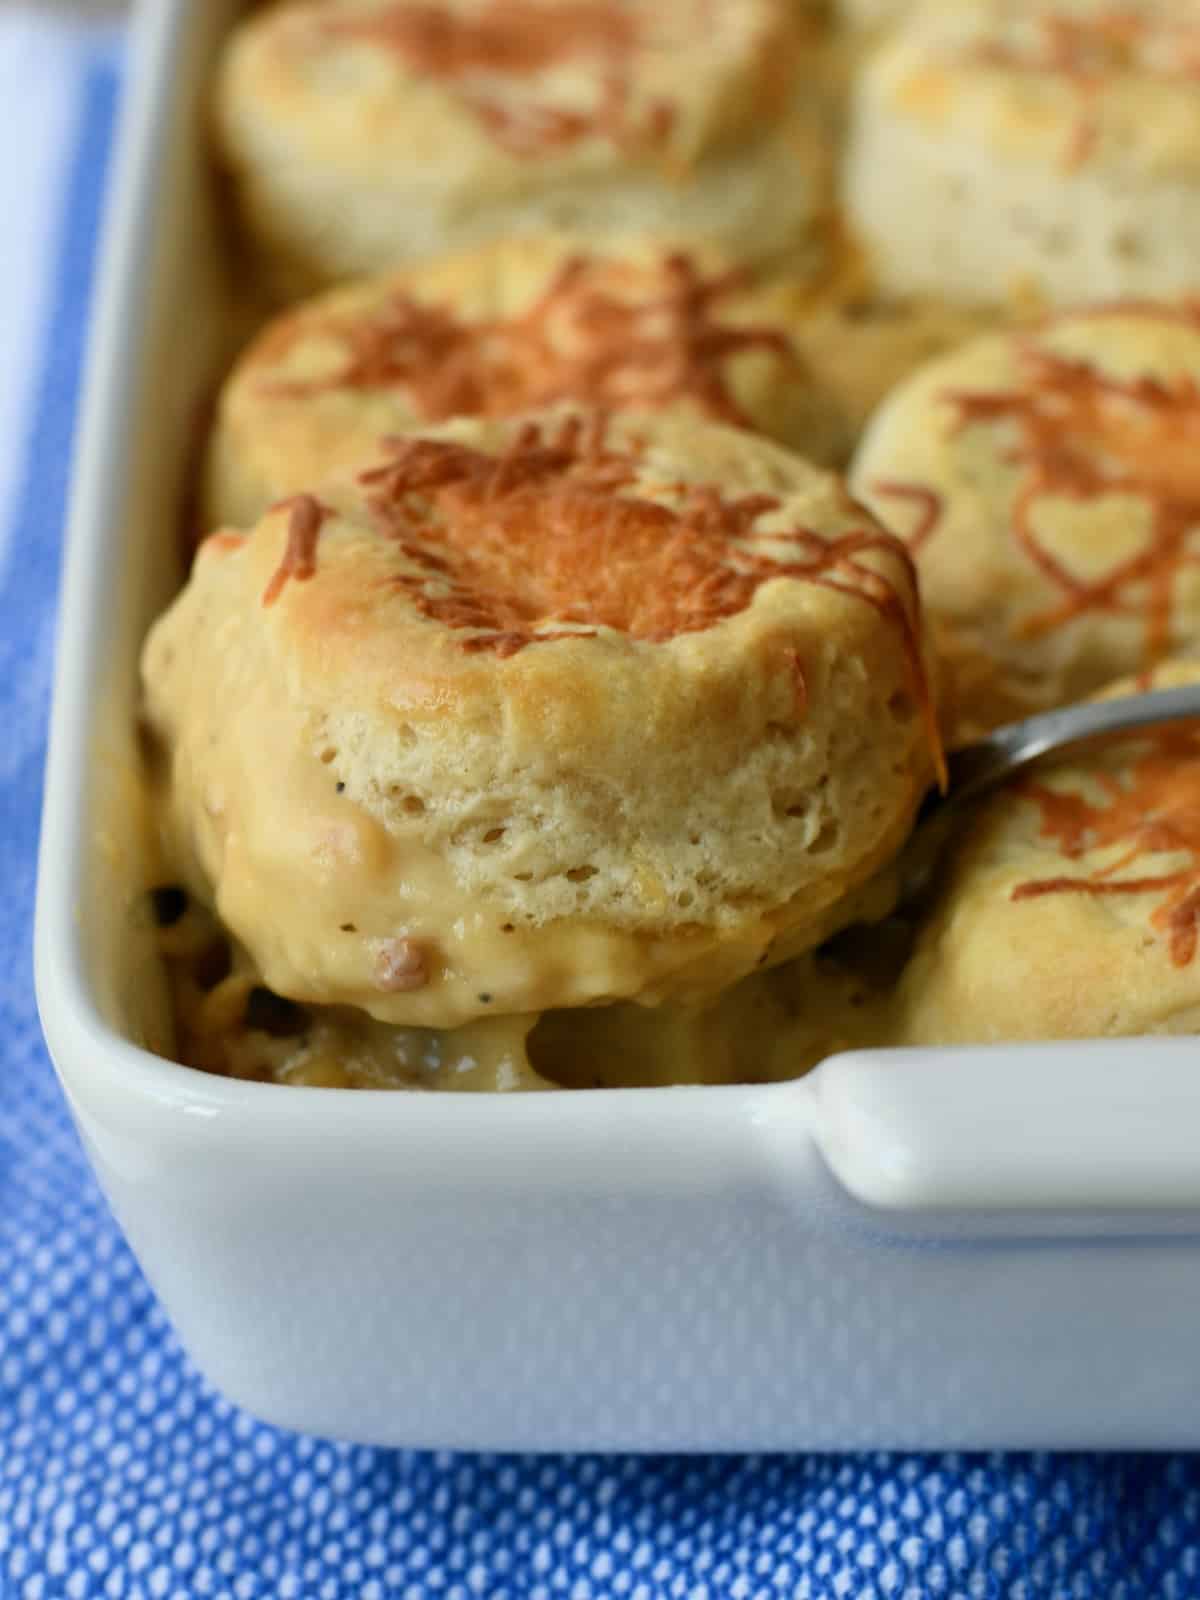 Sausage Gravy Biscuit Casserole with one biscuit lifted out of dish close up.